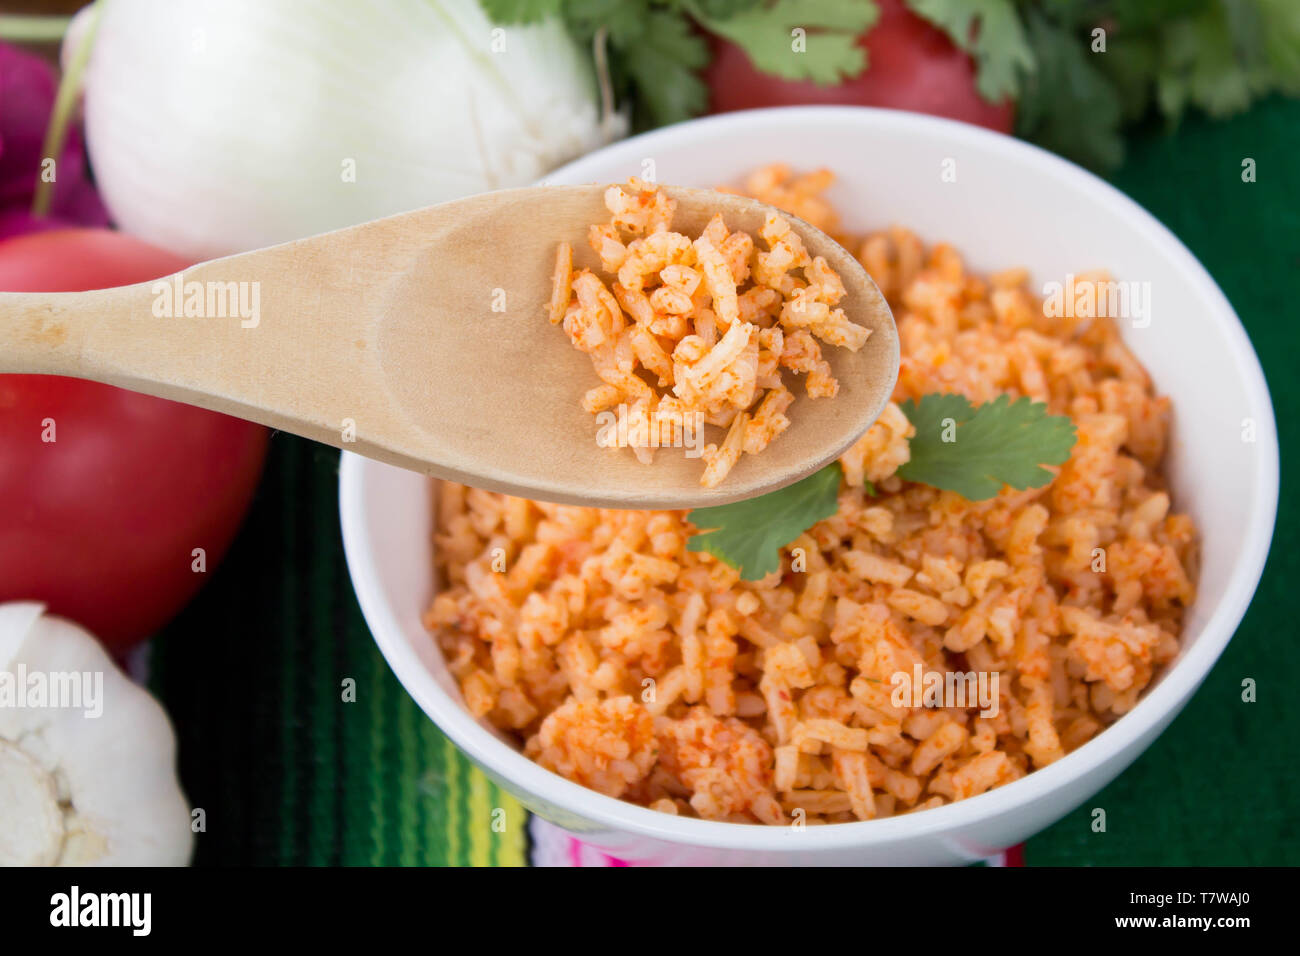 Mexican -style rice in white bowl with close-up of wooden spoonful of rice in foreground, ingredients set against green background Stock Photo